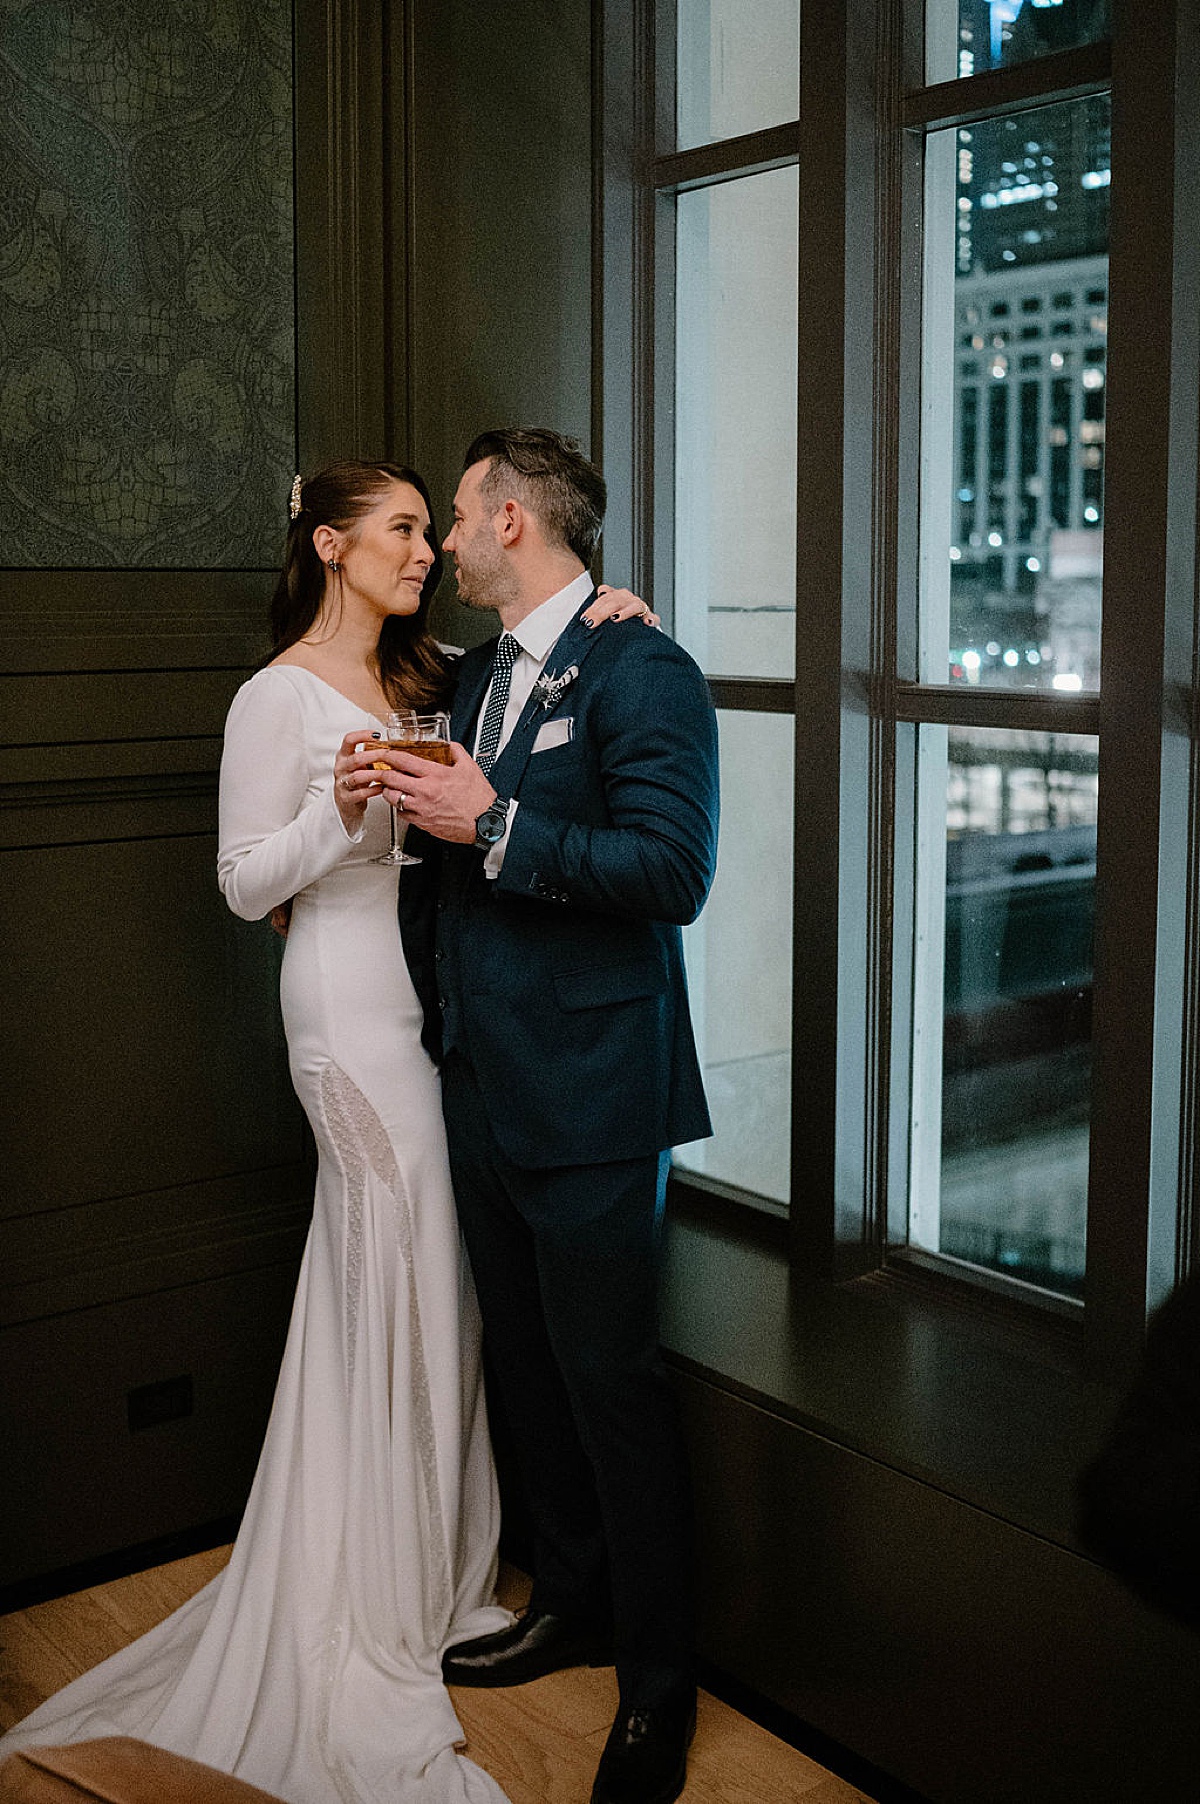 classy christmas bride and groom pose in Chicago high rise window with cocktails after ceremony shot by Indigo Lace Collective